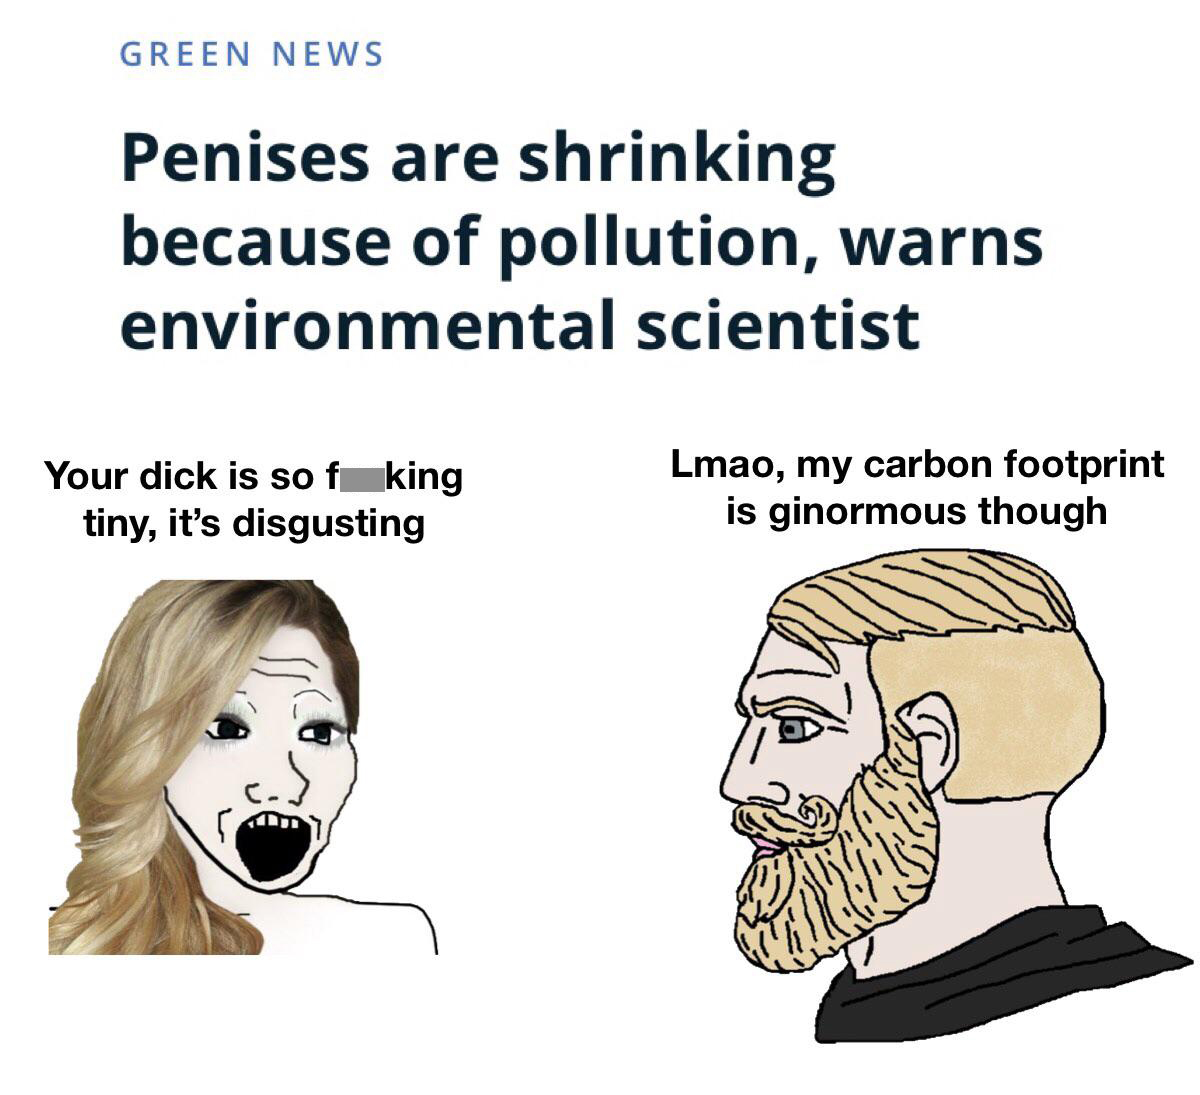 dank memes - christian yes chad - Green News Penises are shrinking because of pollution, warns environmental scientist Your dick is so f king tiny, it's disgusting Lmao, my carbon footprint is ginormous though